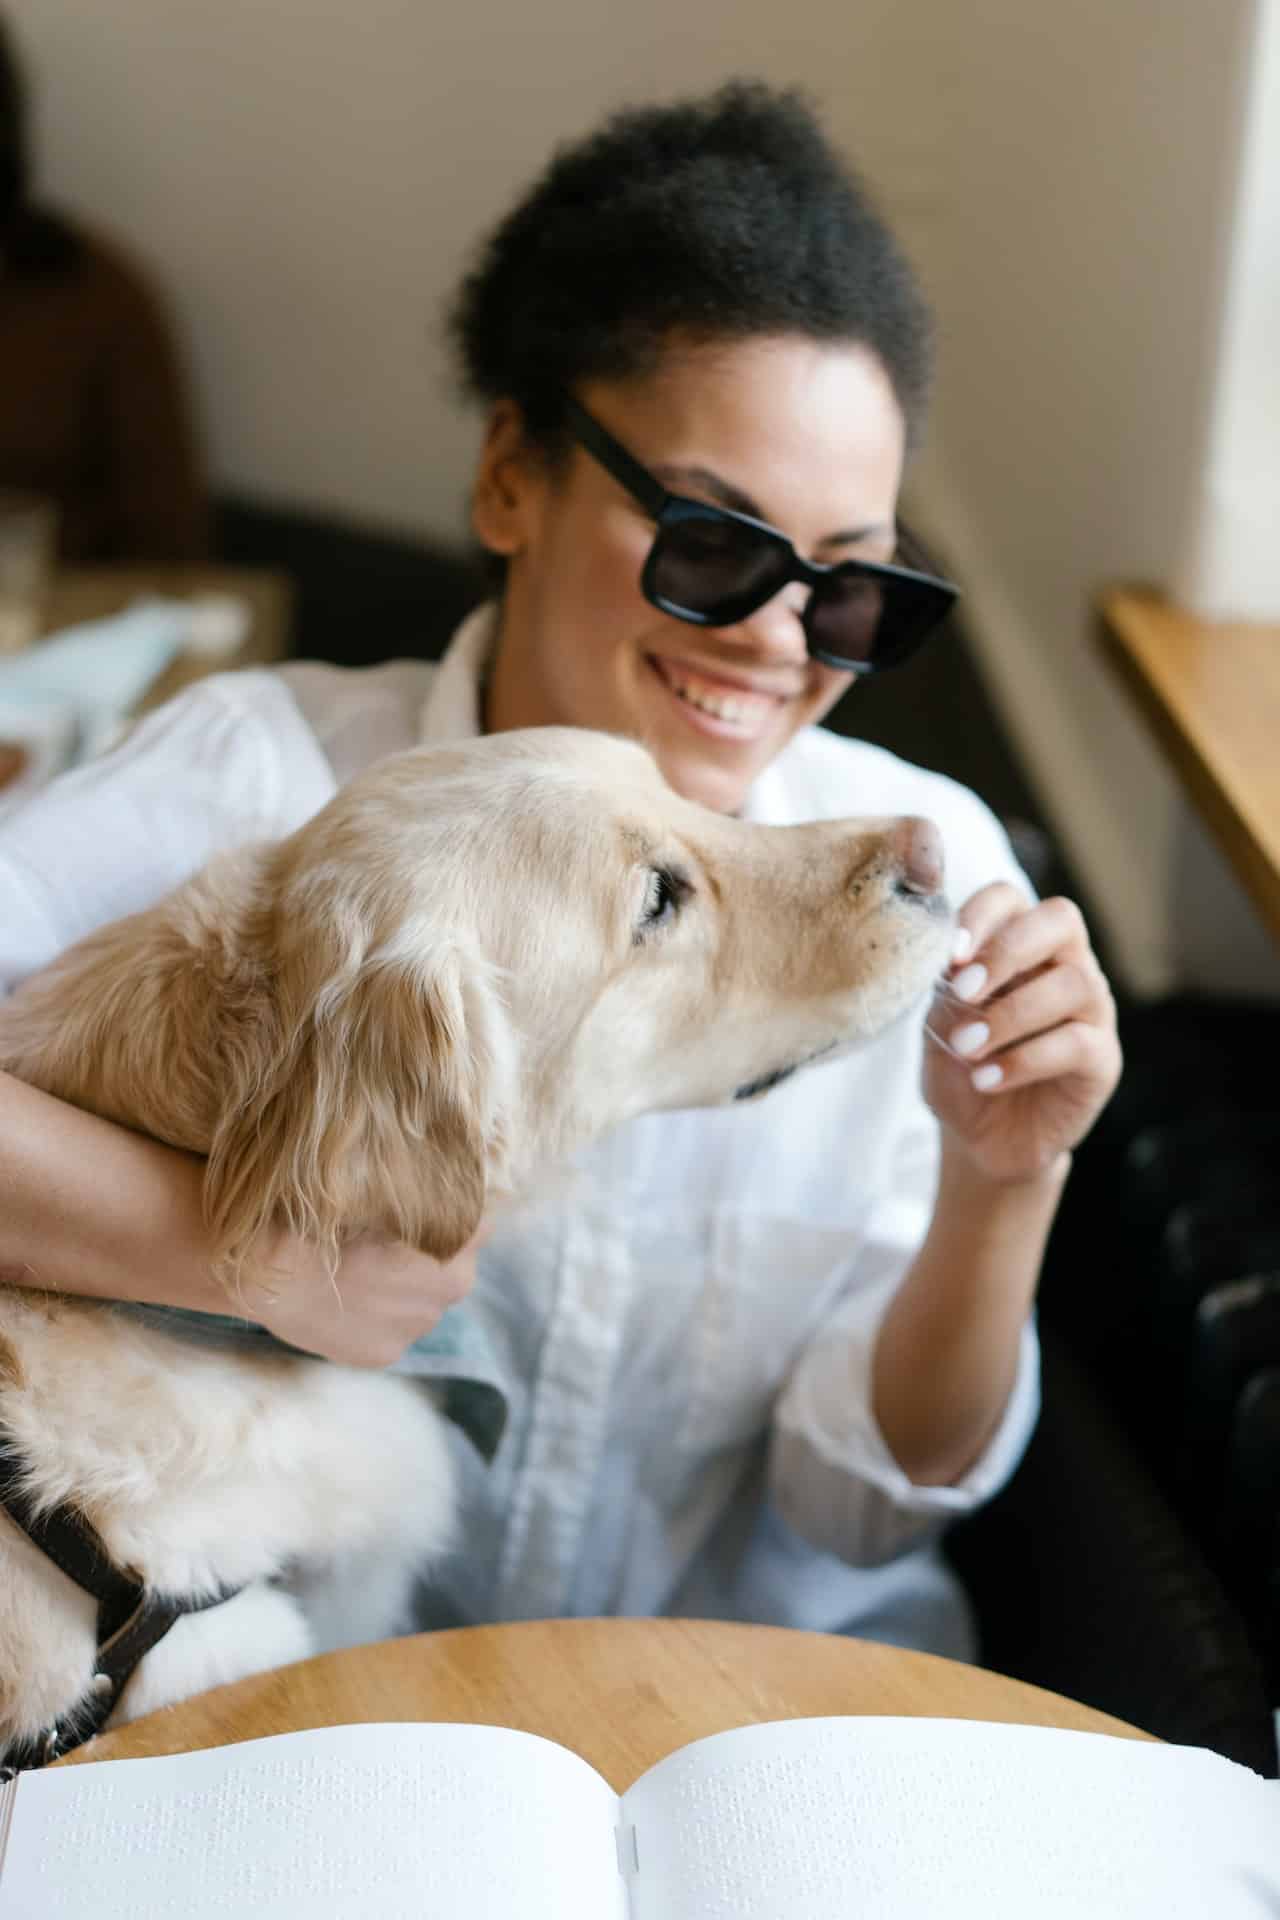 A blind Black woman wearing dark glasses sits at a table with a braille book open in front of her. She is smiling and feeding a treat to her service animal, a golden retriever.